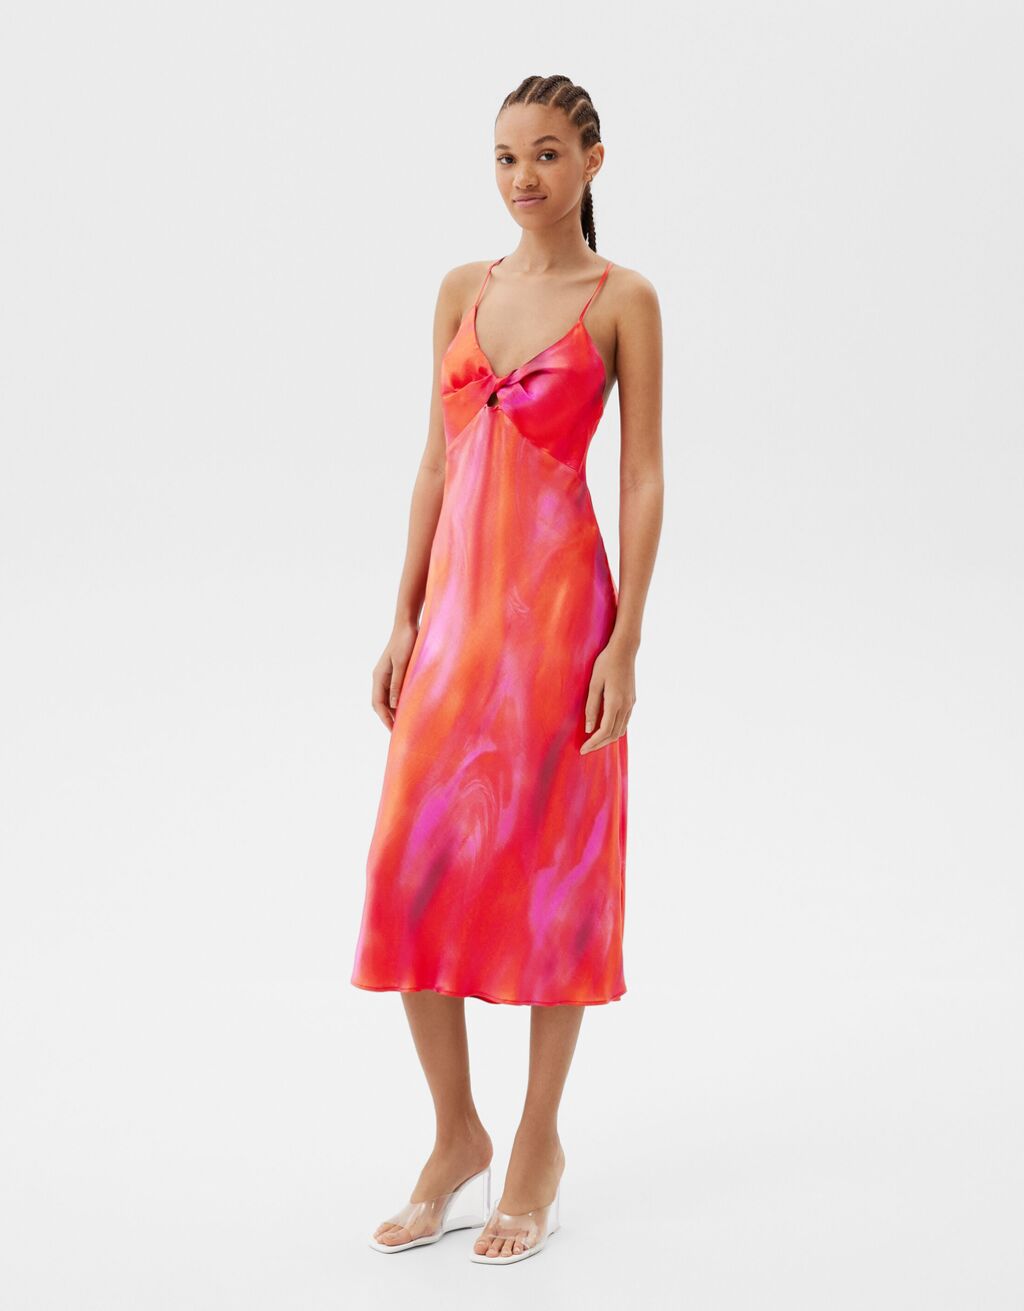 Long satin dress with front cut-out detail